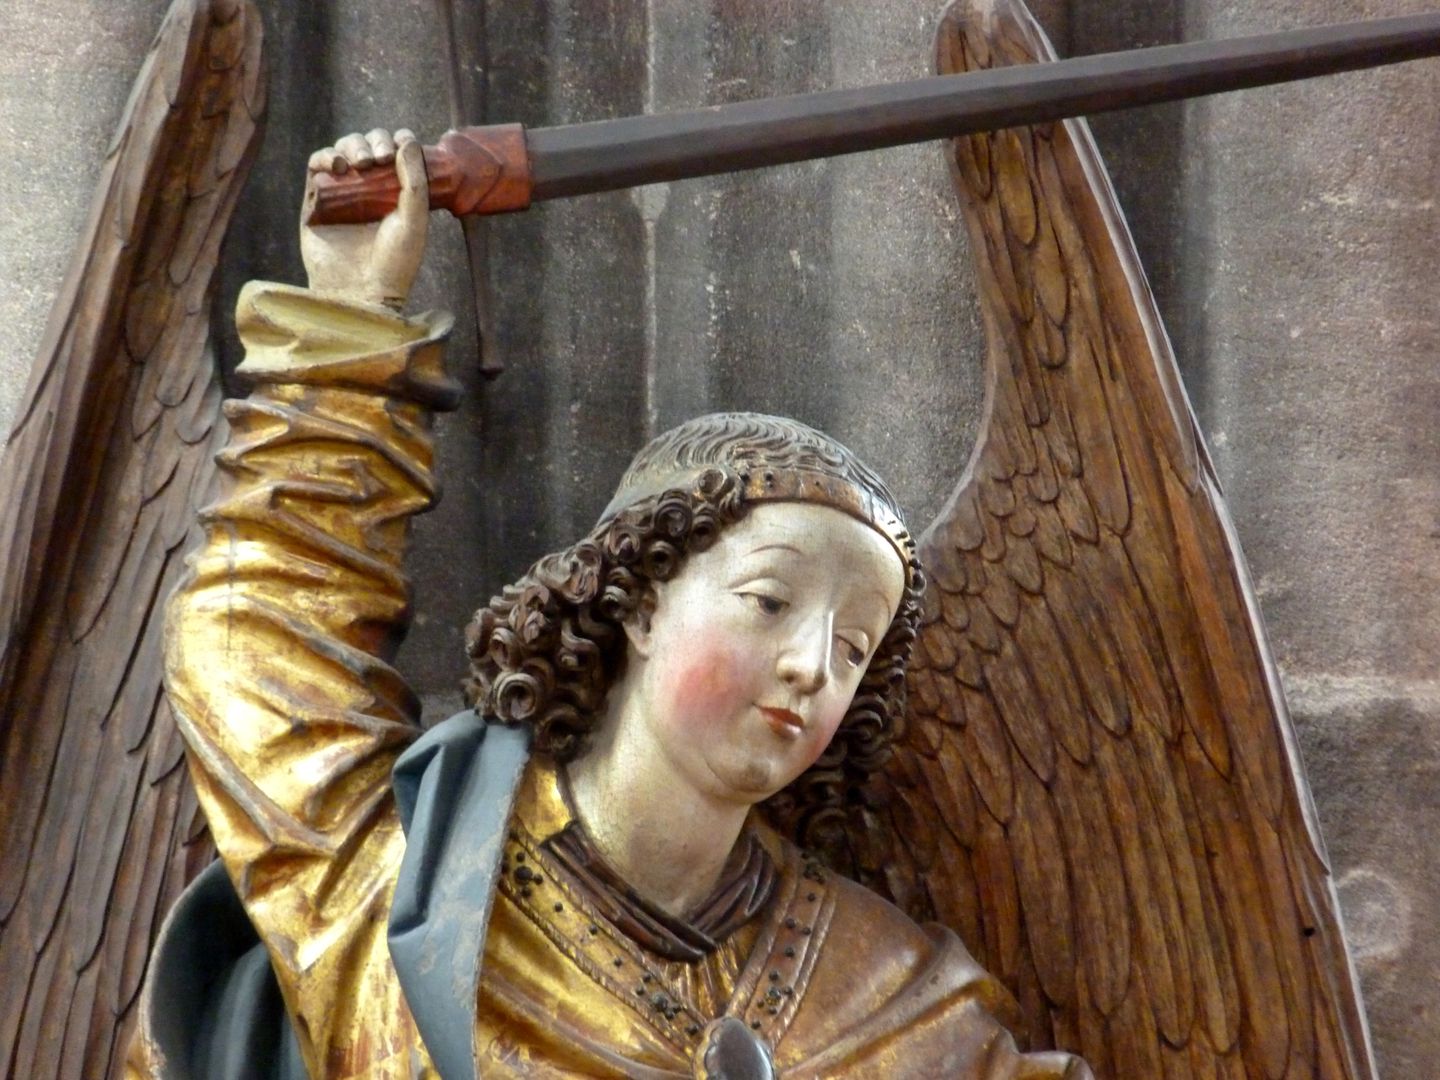 Archangel Michael Detail of the Archangel with his right hand raised with sword